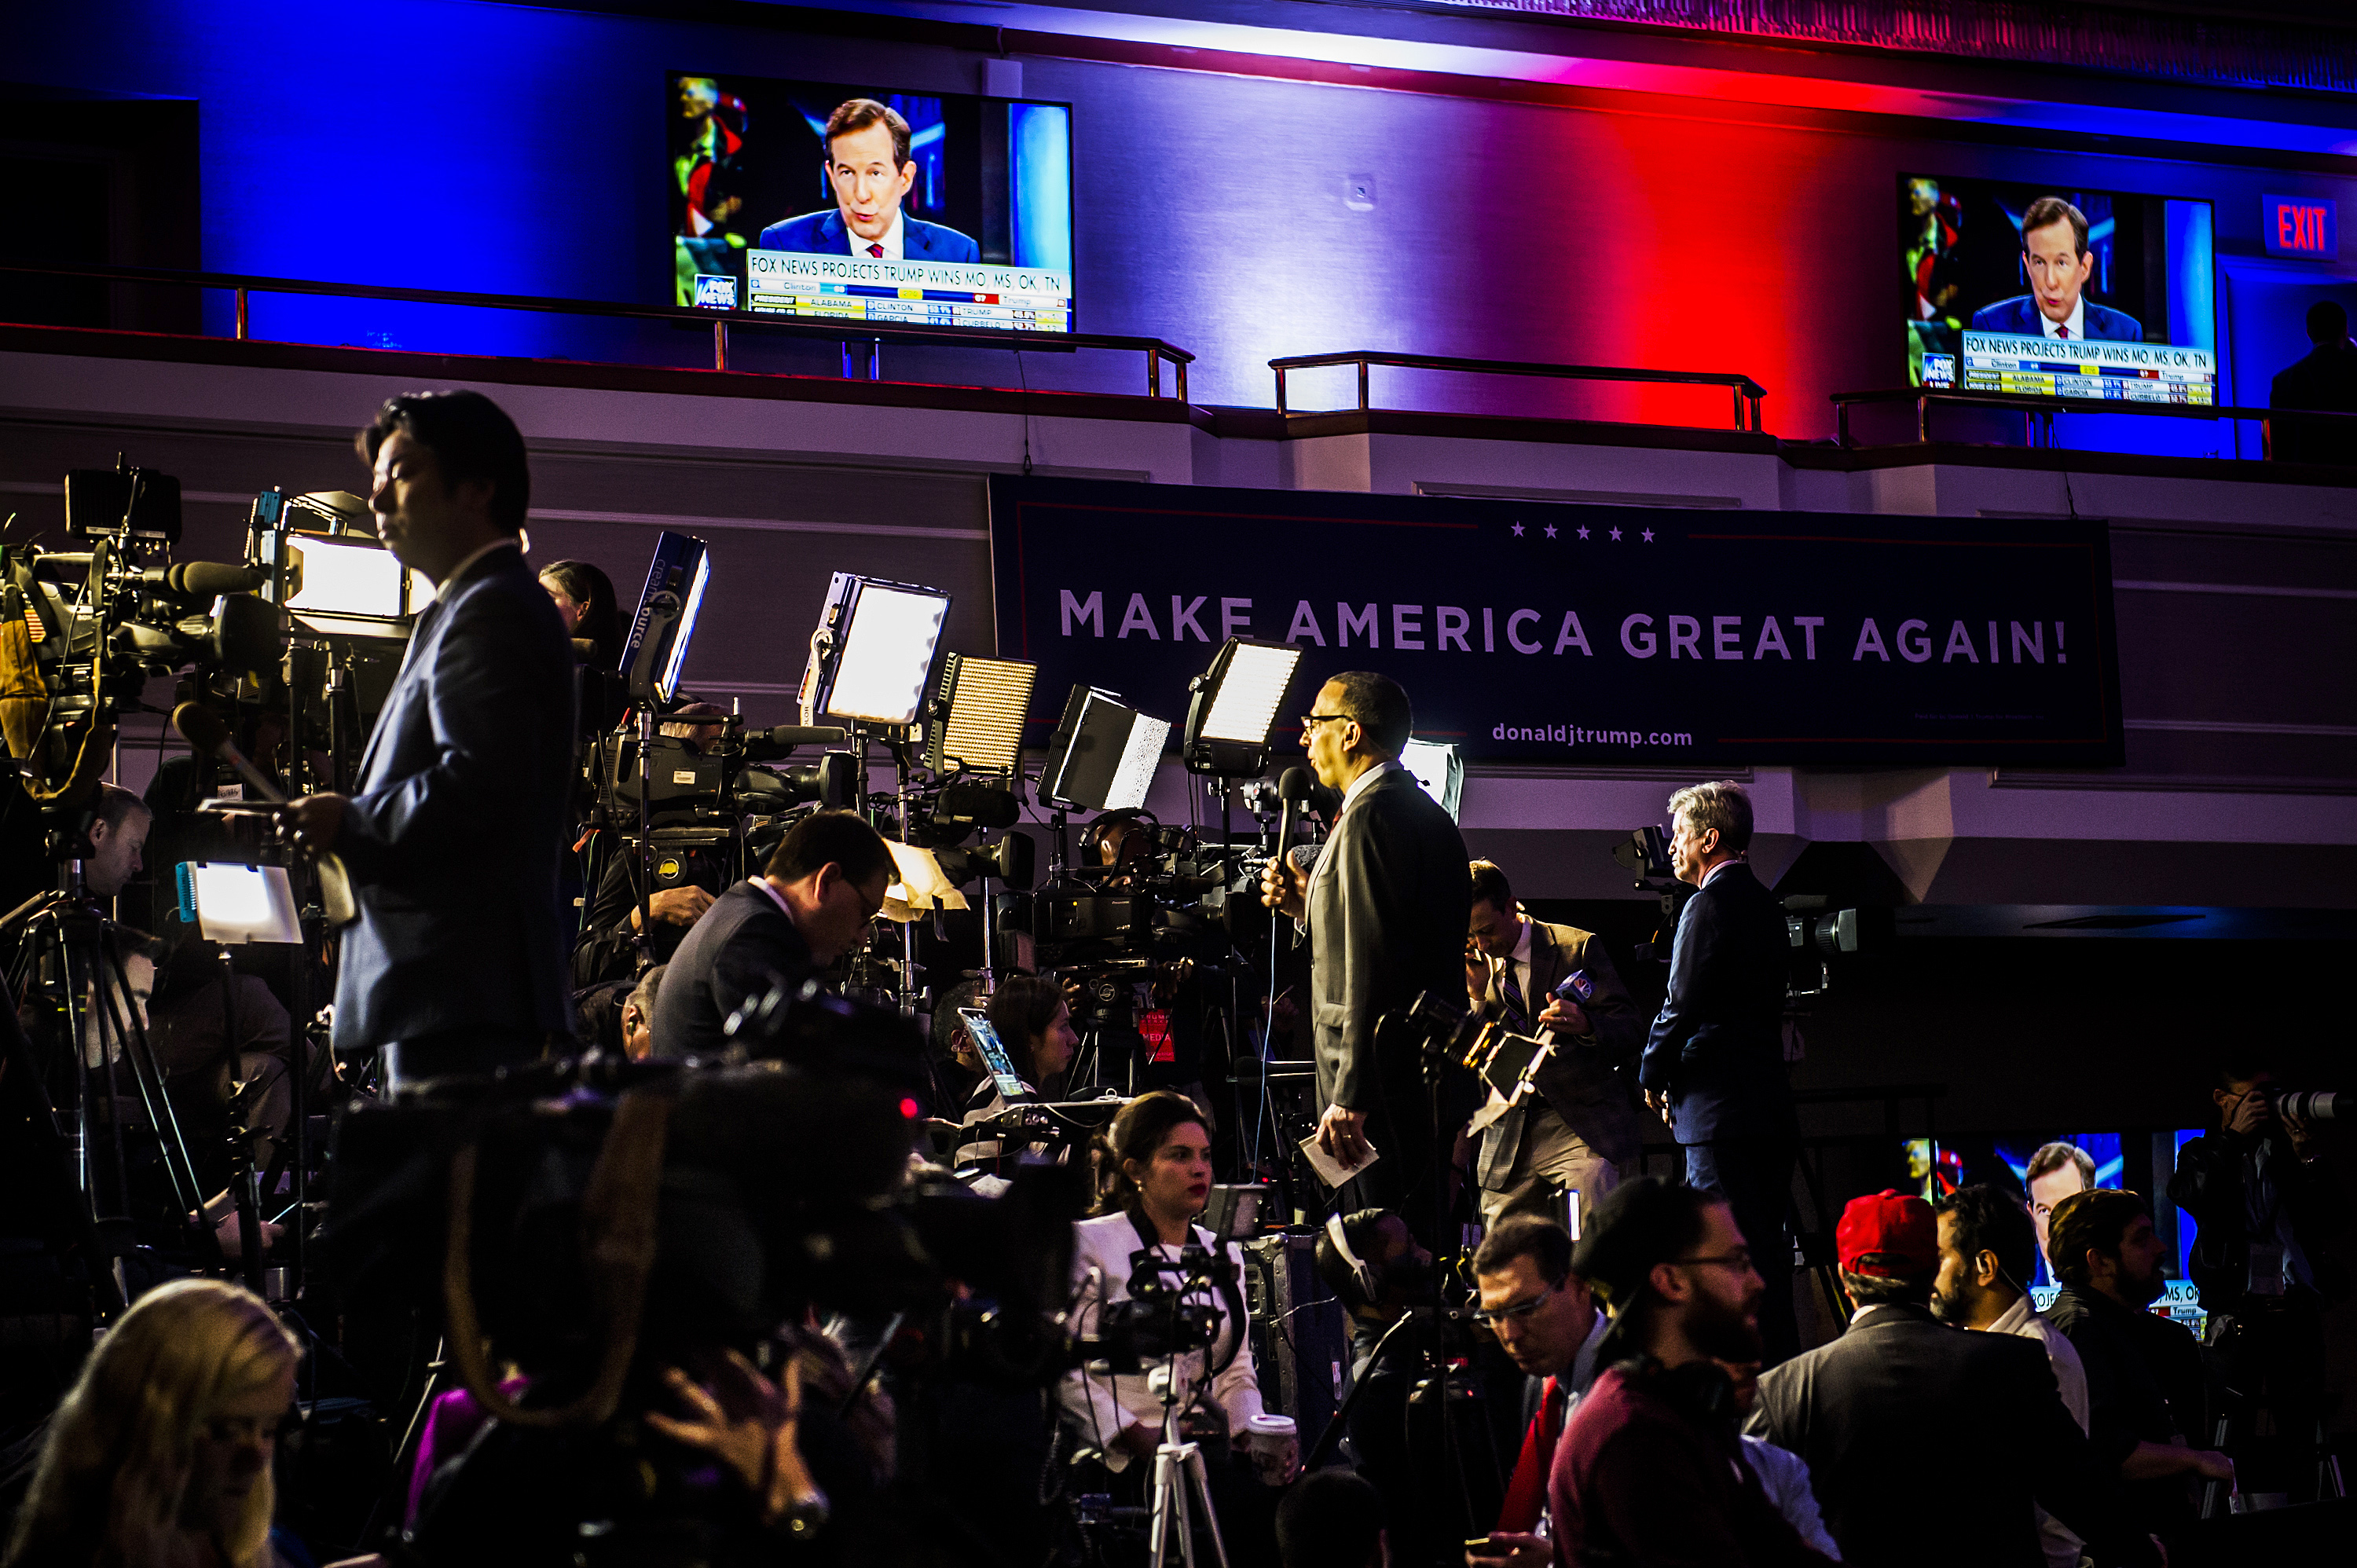 at an election night party for Republican presidential candidate Donald Trump, Tuesday, Nov. 8, 2016 in New York's Manhattan borough. Trump faces Democratic nominee Hillary Clinton in the contest for president of the United States.